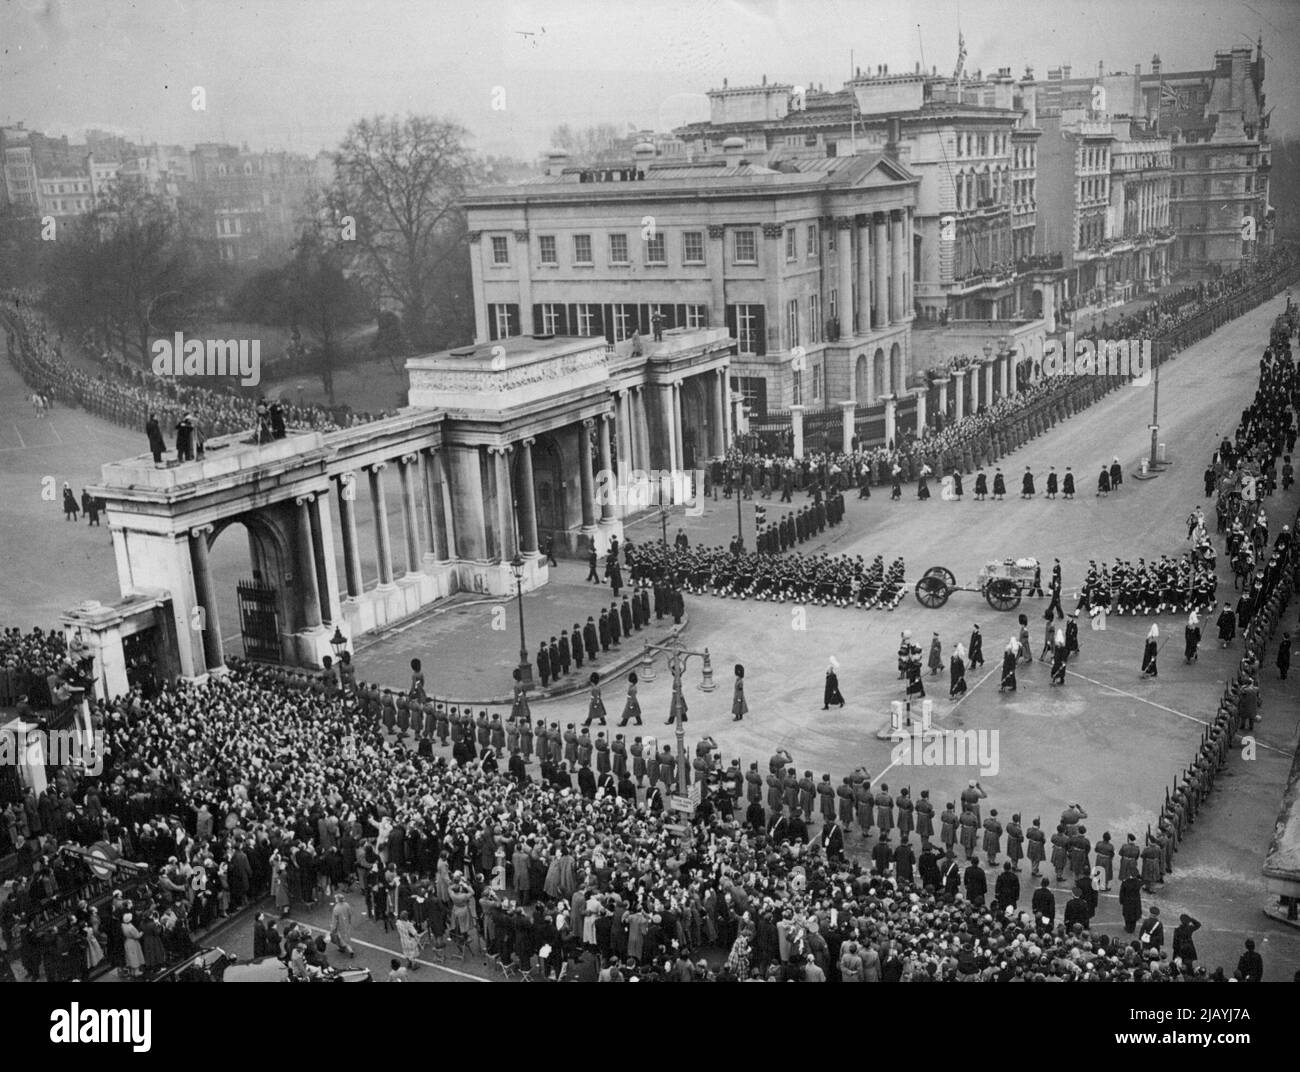 London's Farewell to King George VI - The silent multitude watching the funeral procession as it enters the East carriage Drive at Hyde Park Corner. The Royal coffin drawn on a gun-carriage by naval ratings, is seen in the Drive. Sorrowing London bade farewell to King George VI to-day (Friday) when his funeral cortege passed form Westminster Hall to Paddinton Station, where the coffin was entrained for Windsor. February 15, 1952. (Photo by Reuterphoto). Stock Photo